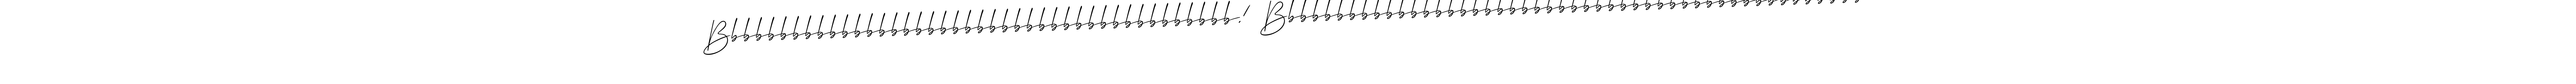 Similarly Allison_Script is the best handwritten signature design. Signature creator online .You can use it as an online autograph creator for name Bbbbbbbbbbbbbbbbbbbbbbbbbbbbbbbbbbbbbbbbbb! Bbbbbbbbbbbbbbbbbbbbbbbbbbbbbbbbbbbbbbbbbbbbbbbb. Bbbbbbbbbbbbbbbbbbbbbbbbbbbbbbbbbbbbbbbbbb! Bbbbbbbbbbbbbbbbbbbbbbbbbbbbbbbbbbbbbbbbbbbbbbbb signature style 2 images and pictures png